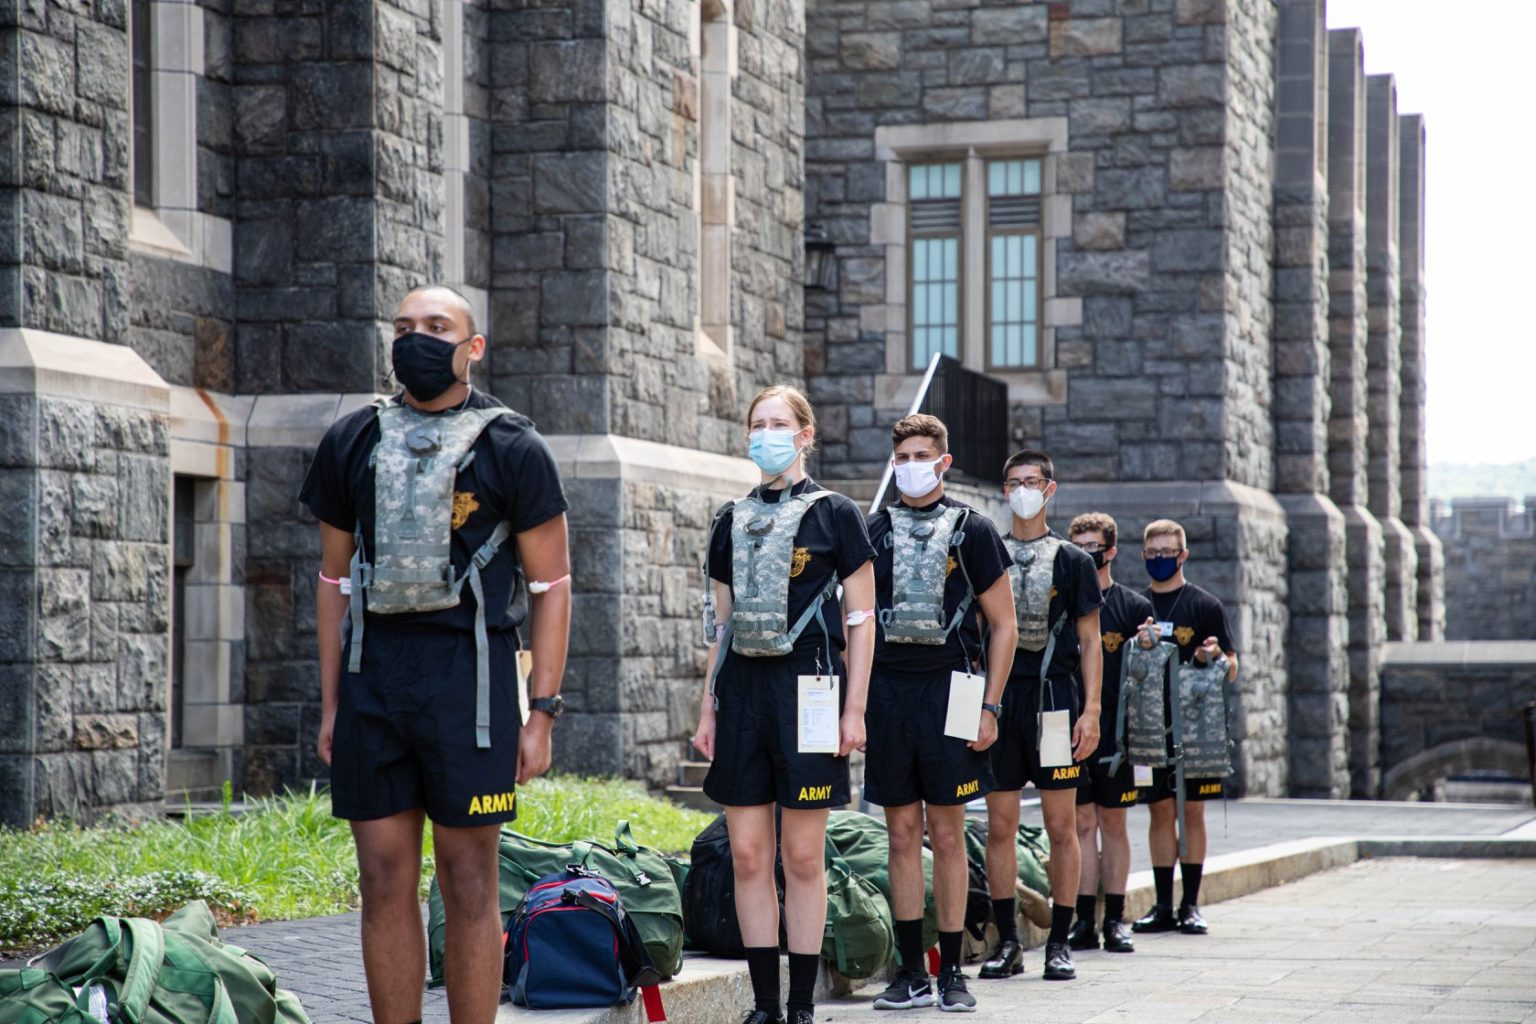 Class of 2026 to enter West Point Mid Hudson News